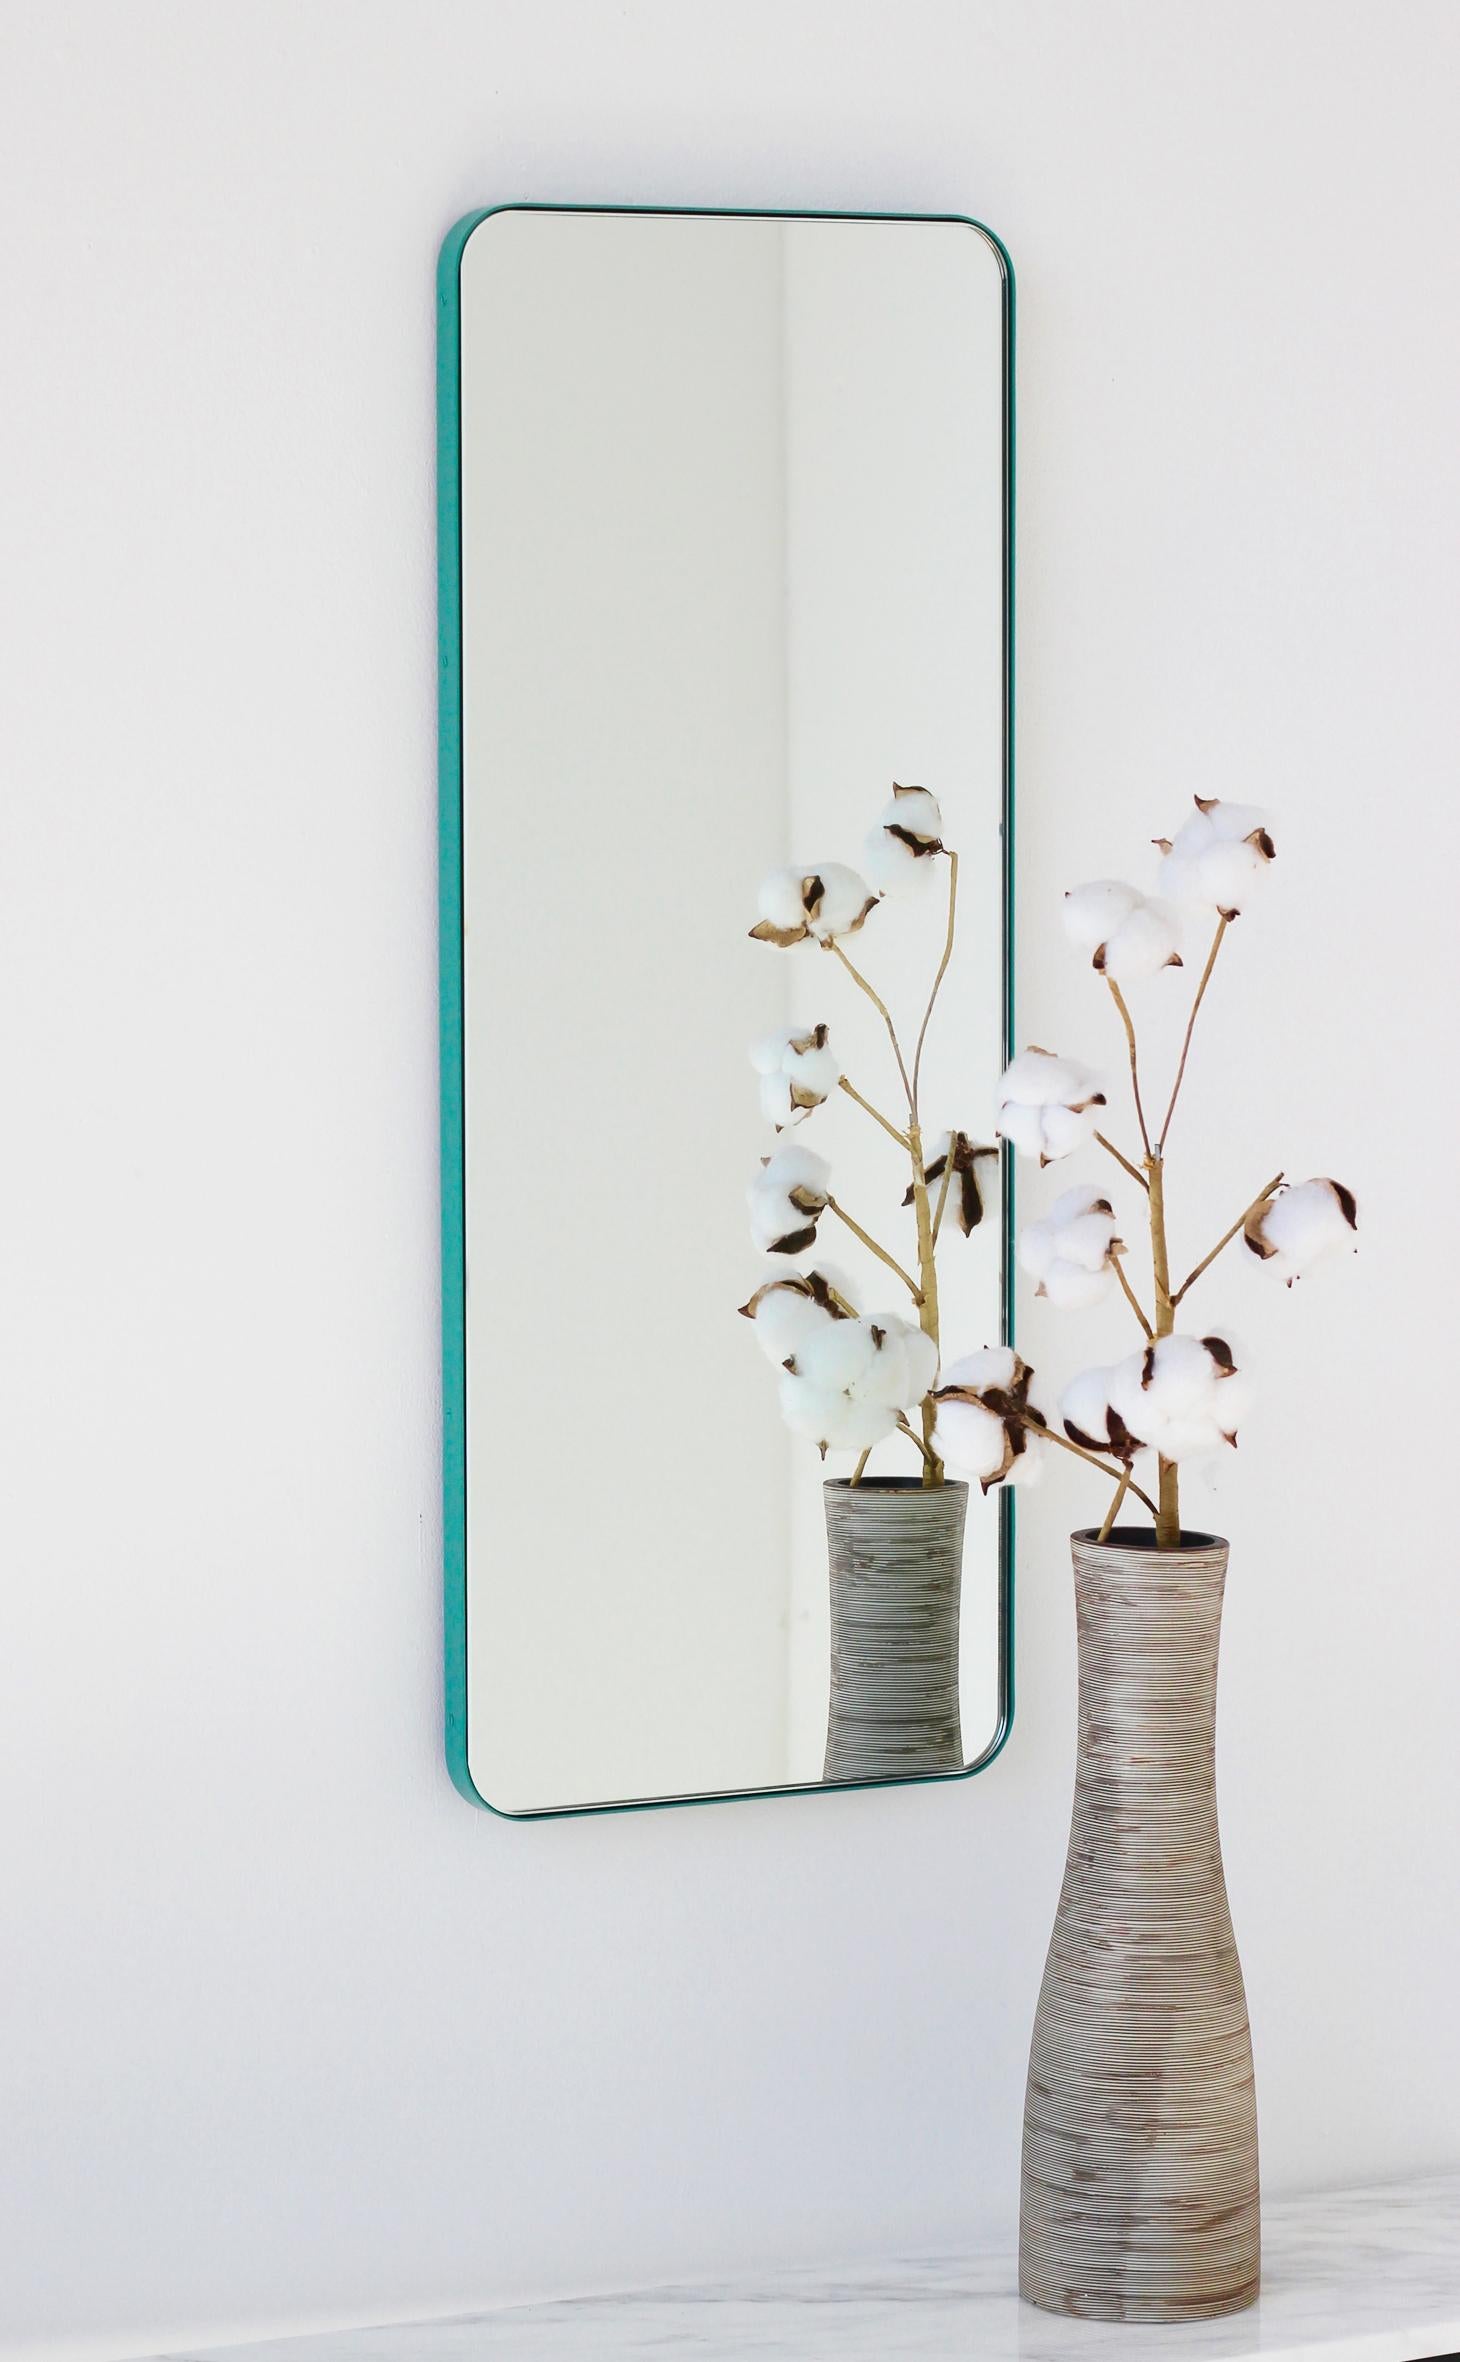 Modern rectangular mirror with an aluminium powder coated mint turquoise frame. Part of the charming Quadris™ collection, designed and handcrafted in London, UK. 

Supplied fitted with a specialist z-bar for an easy installation. A split batten